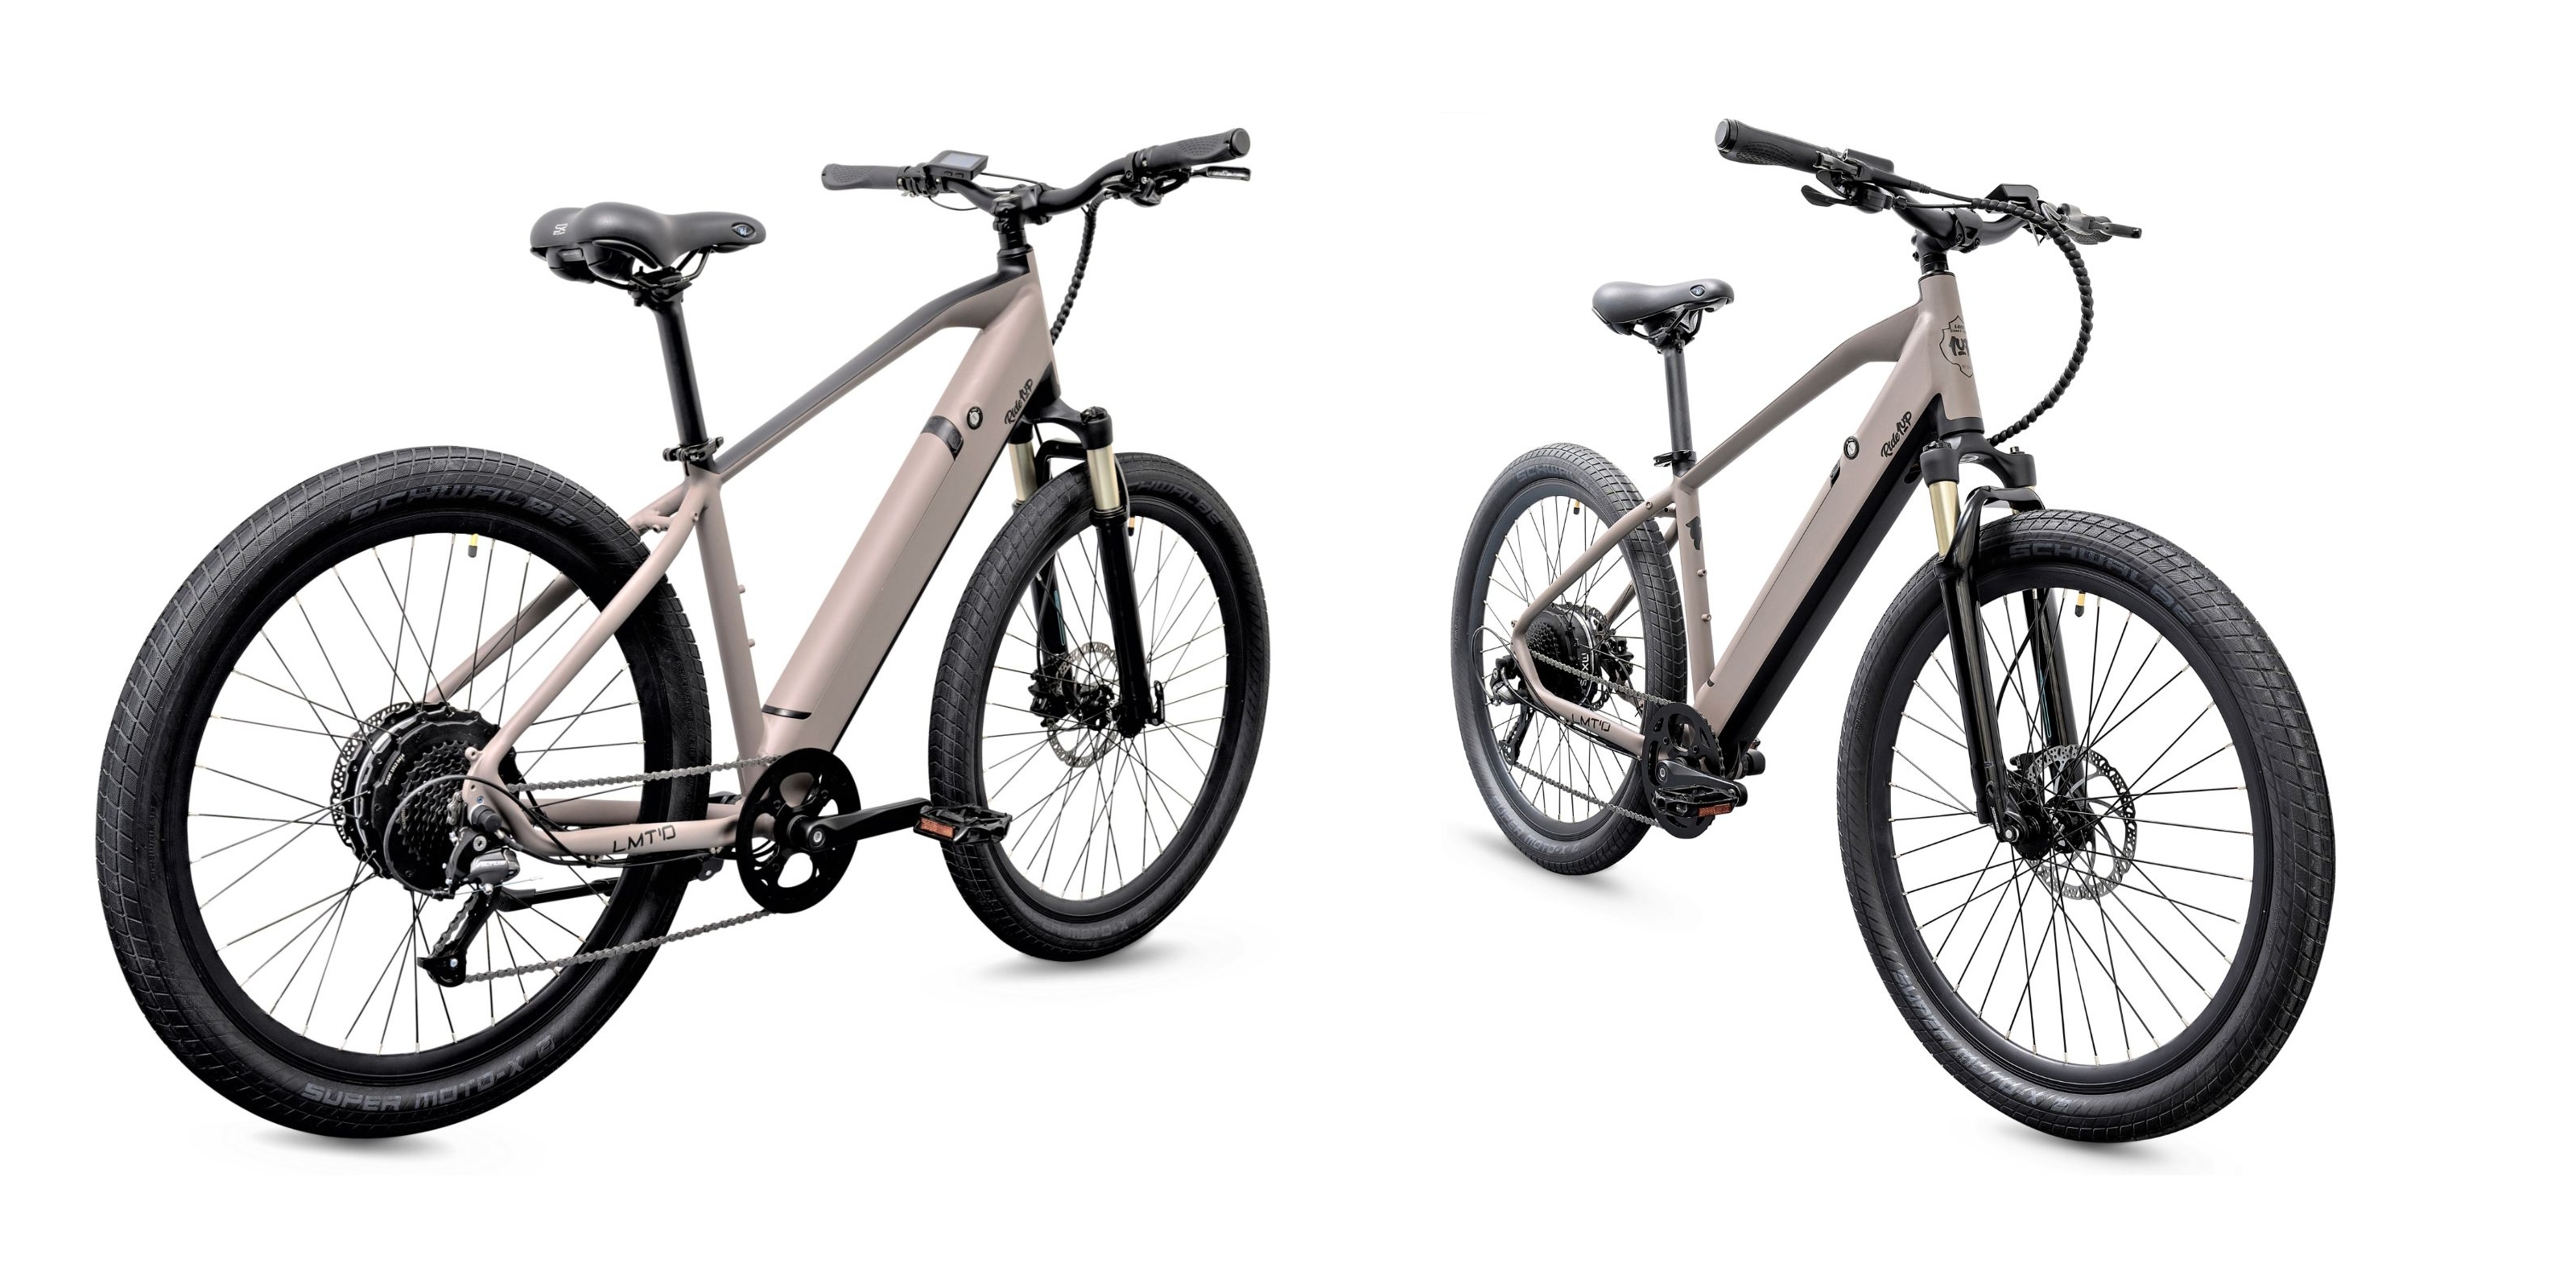 electric bike model and price